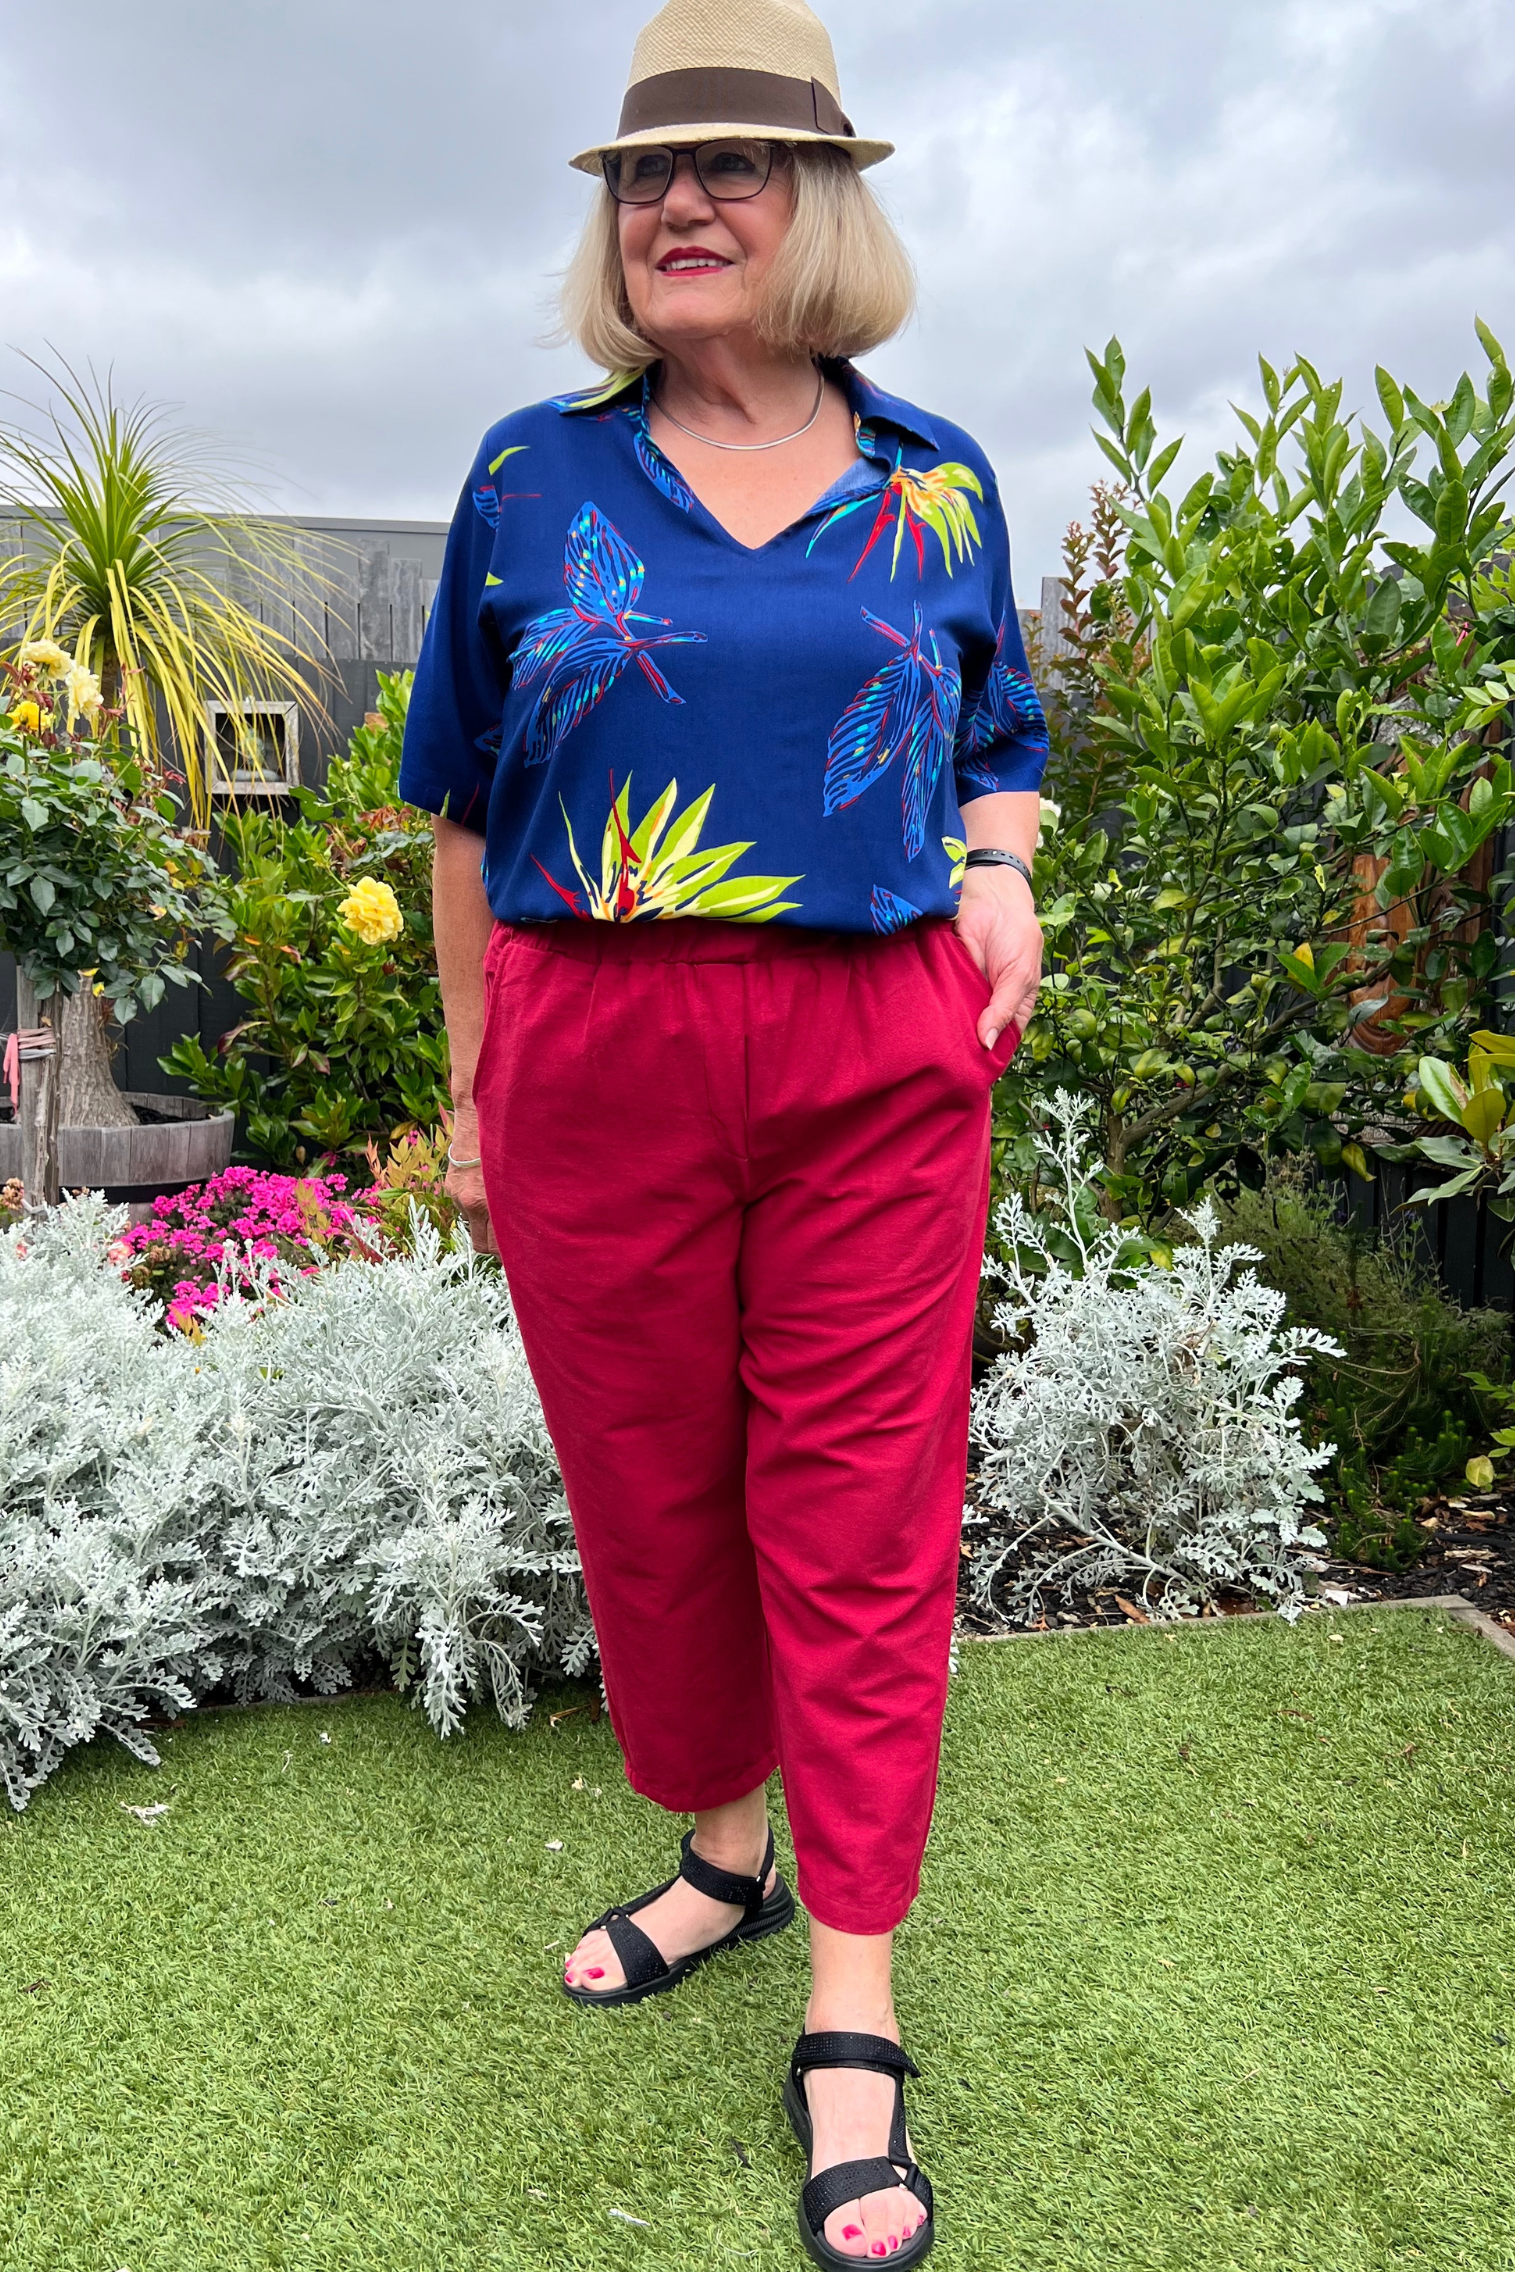 Kita Ku modelling the new pant port in the Raspberry colour along with a Blue Paradise print top Rebecca. 